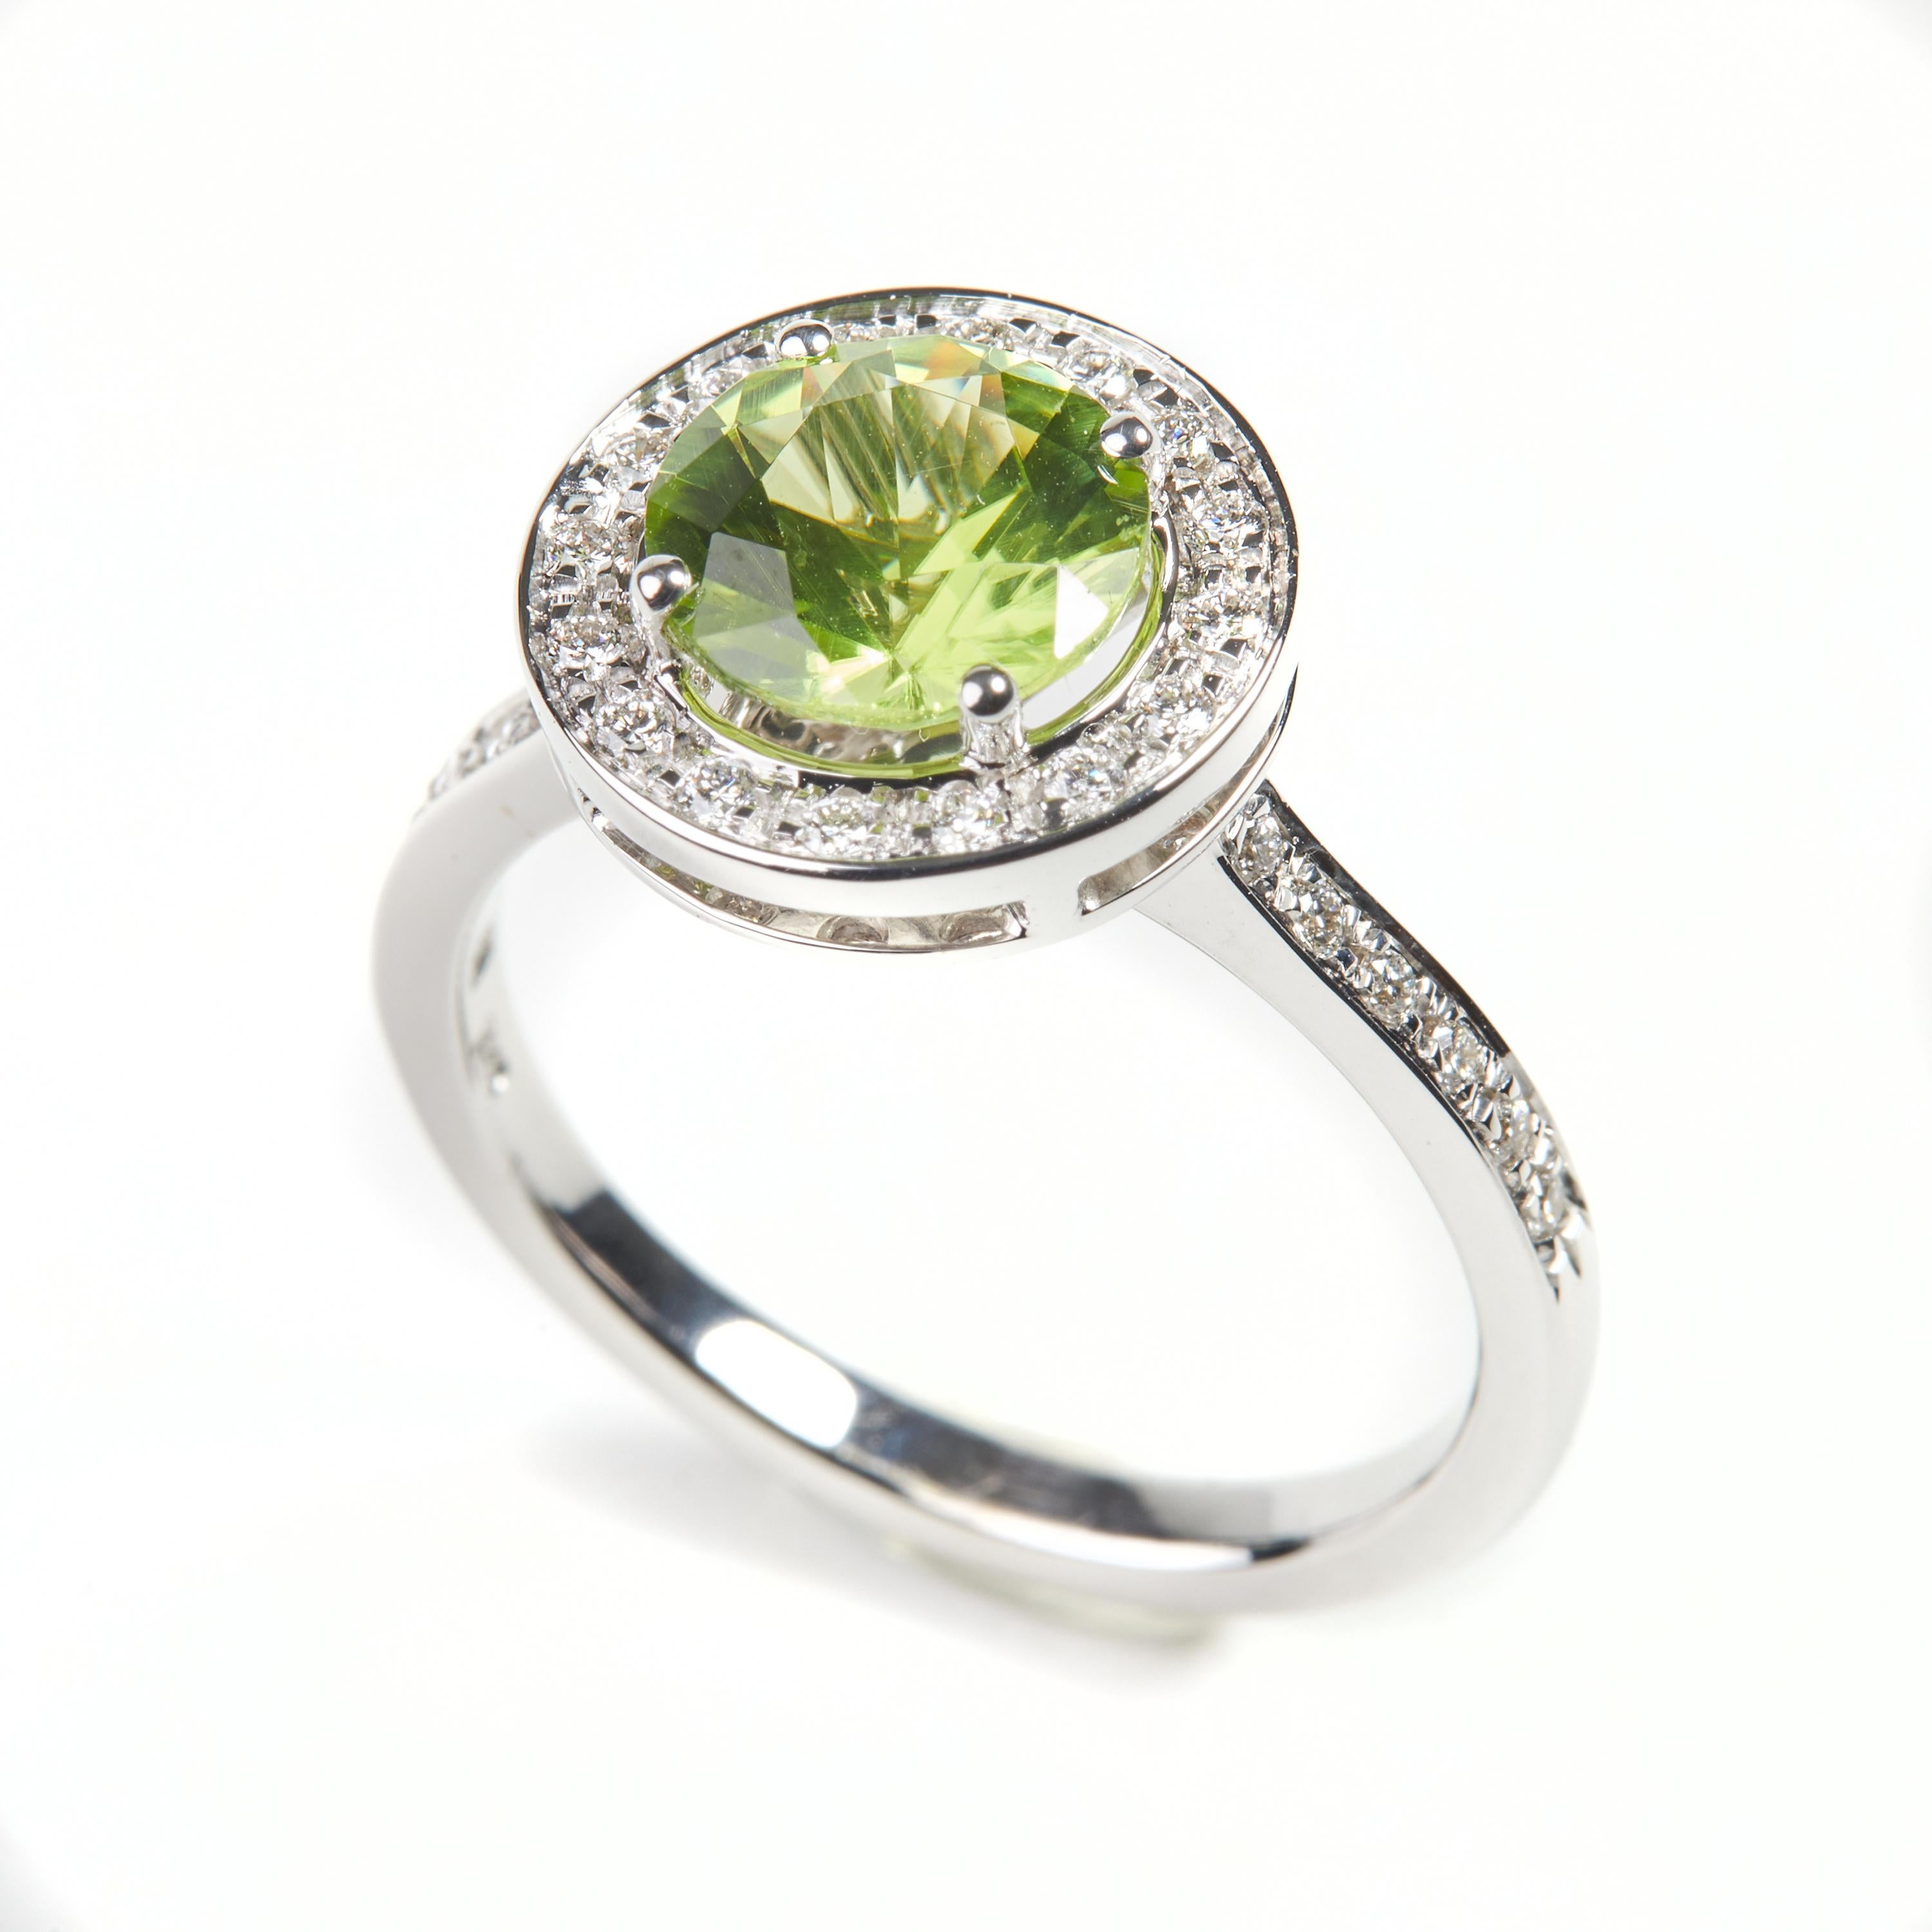 18 Karat White Gold Diamond and Peridot Ring

29 Diamonds 0.32 Carat
1 Peridot  1.90 carat



Size EU 54 US 6.8


Founded in 1974, Gianni Lazzaro is a family-owned jewelery company based out of Düsseldorf, Germany.
Although rooted in Germany, Gianni